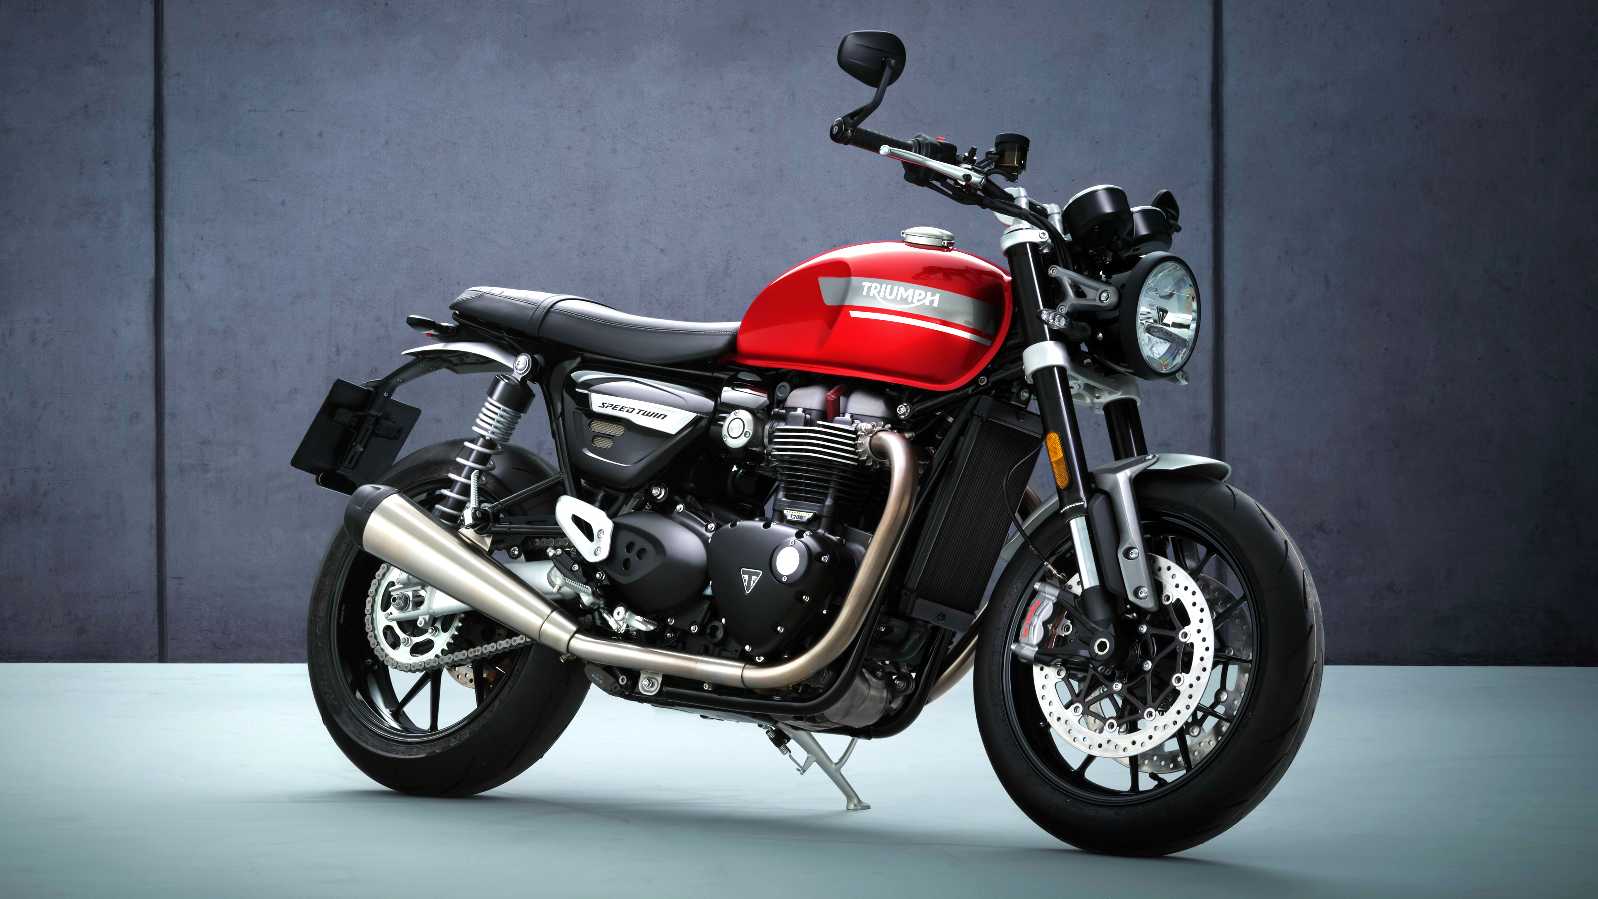 The 2021 Triumph Speed Twin will be available in three colours, including the 'Red Hopper' scheme shown here. Image: Triumph Motorcycles